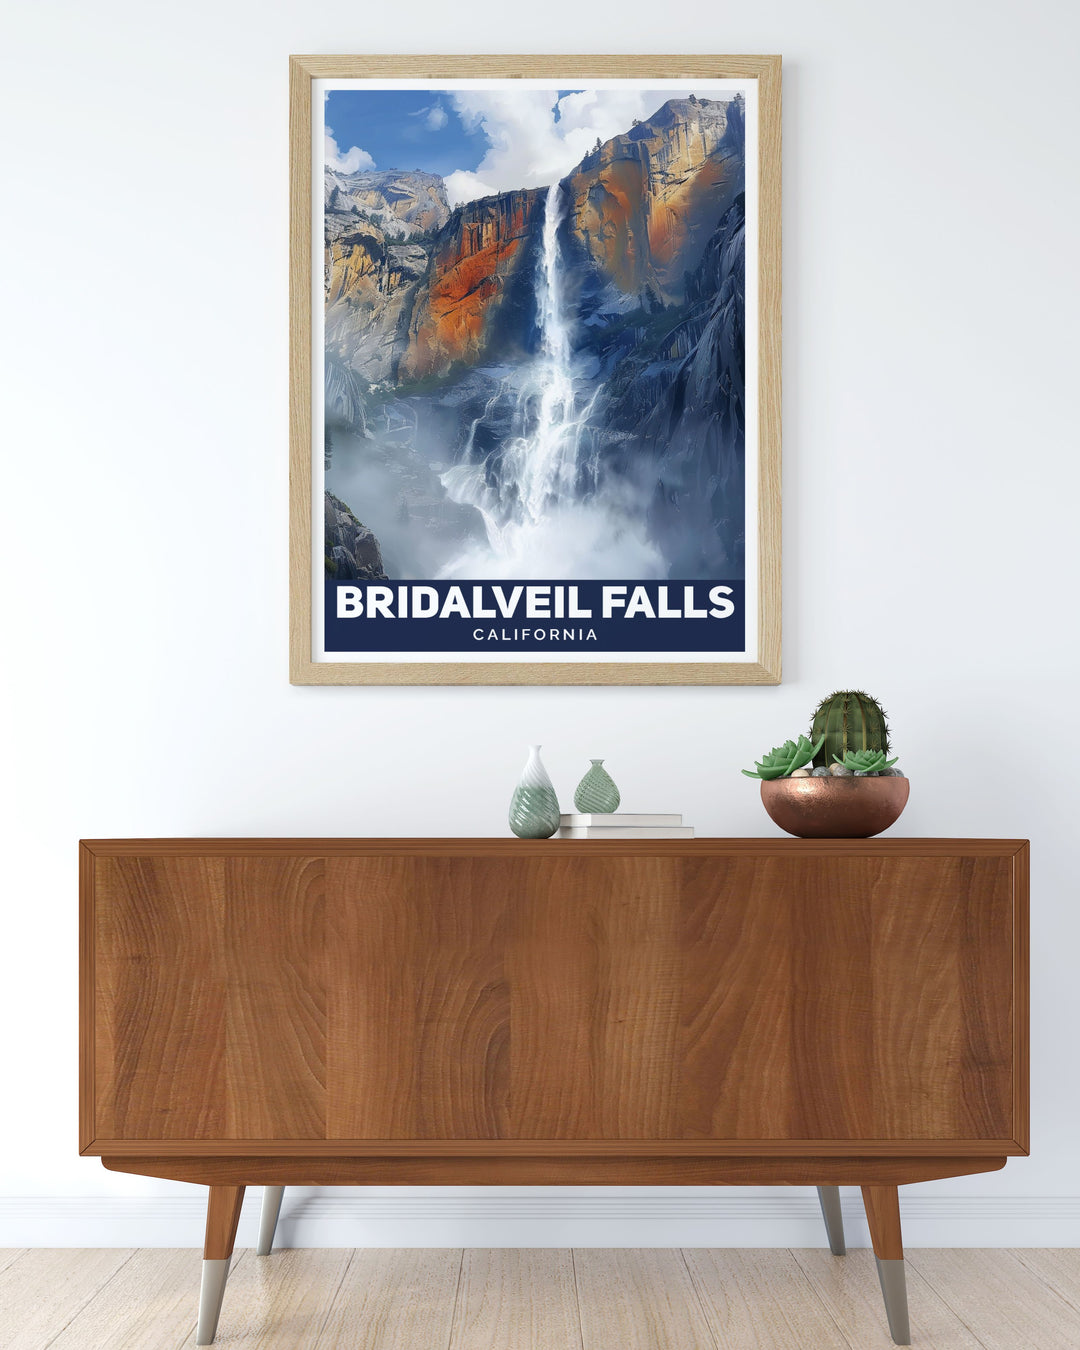 Beautiful Closeup poster of Bridalveil Falls in Yosemite National Park ideal for California decor lovers who want to add a touch of nature to their space. This California artwork is perfect for any room and makes a unique and thoughtful gift for any occasion.